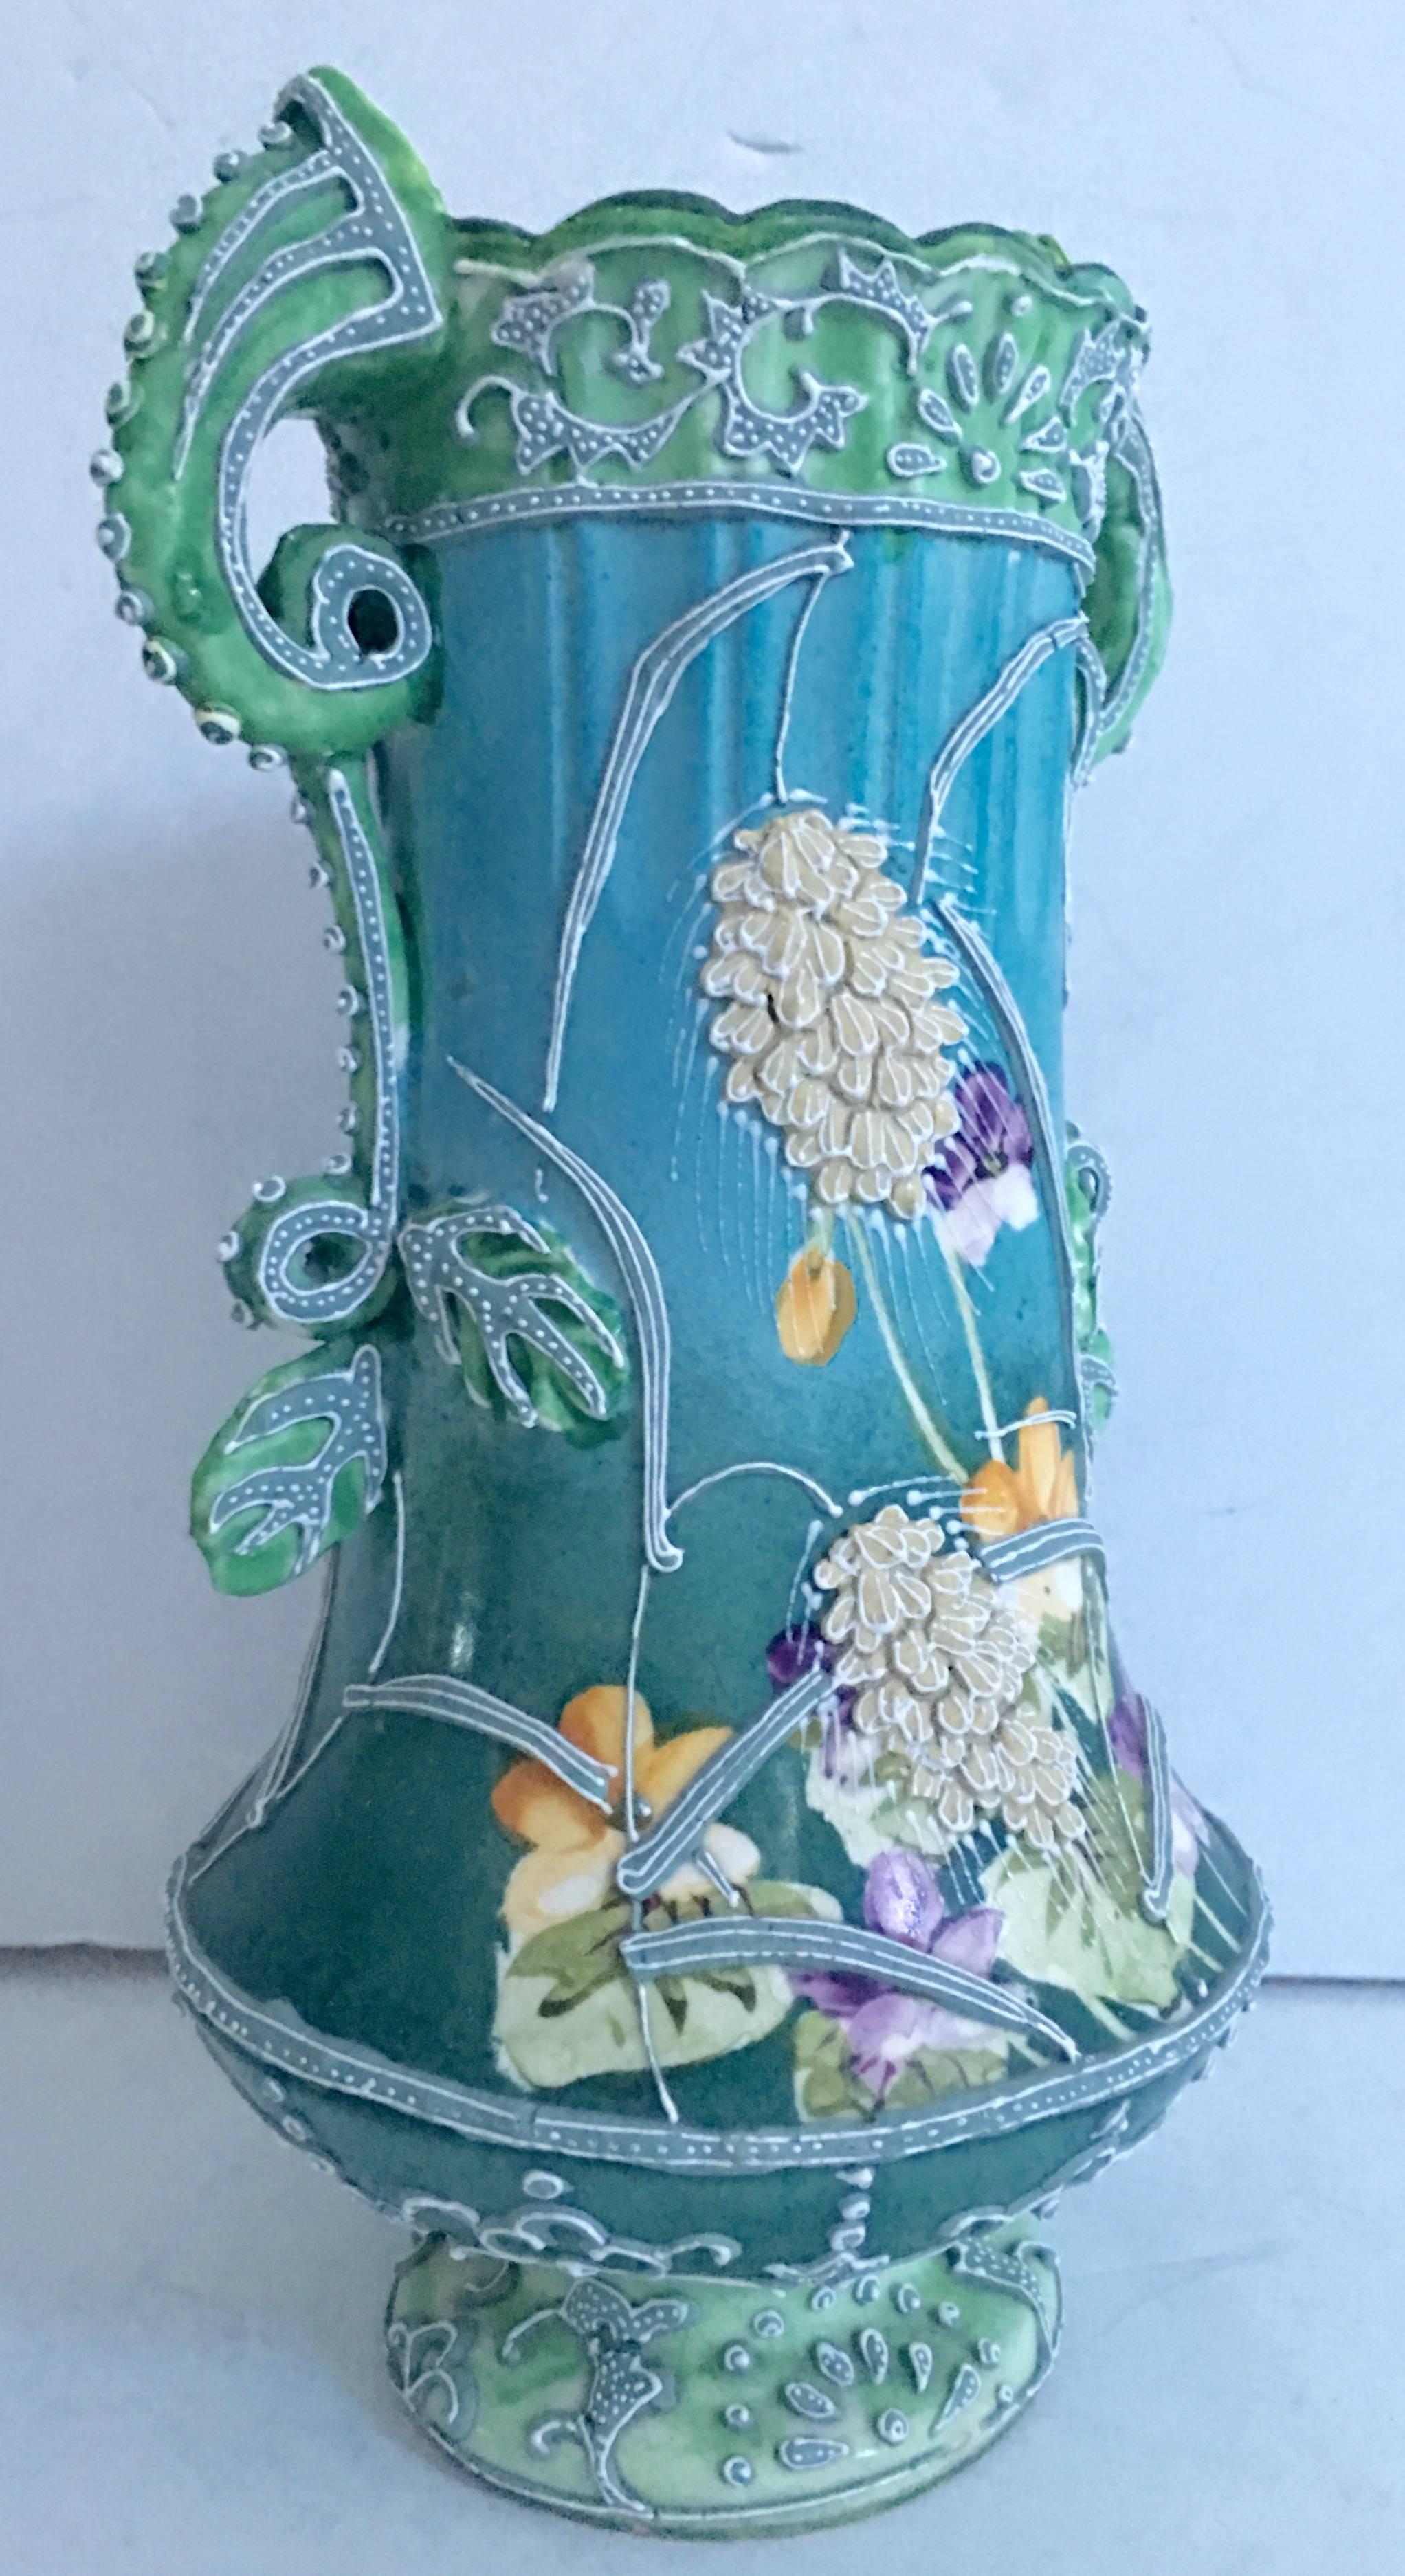 Exquisite Art Nouveau museum quality 19th century "Moriage" style floral motif double handle vase by, Nippon. This early piece of Nippon is unsigned, common for this era of production. Turquoise and green with bright floral design and